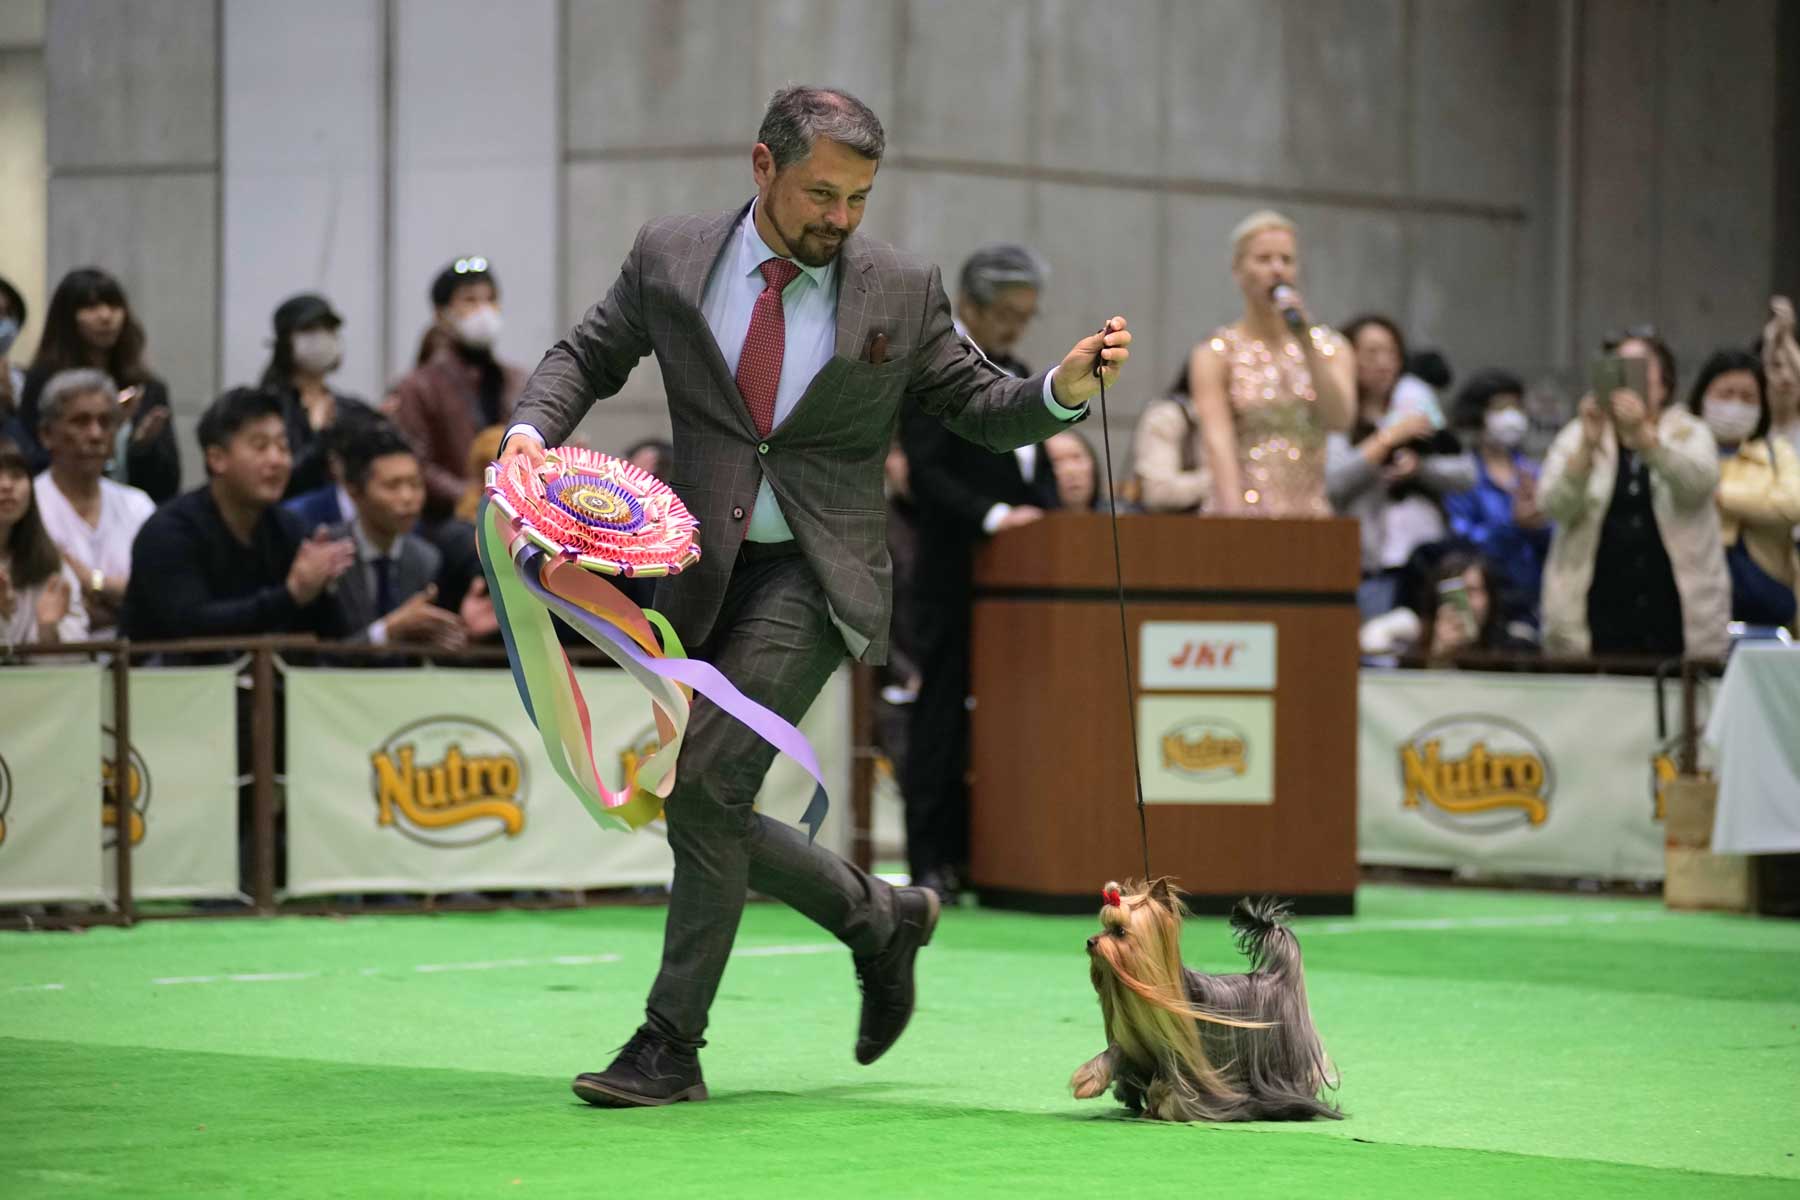 what does best in show mean when referring to a dog show